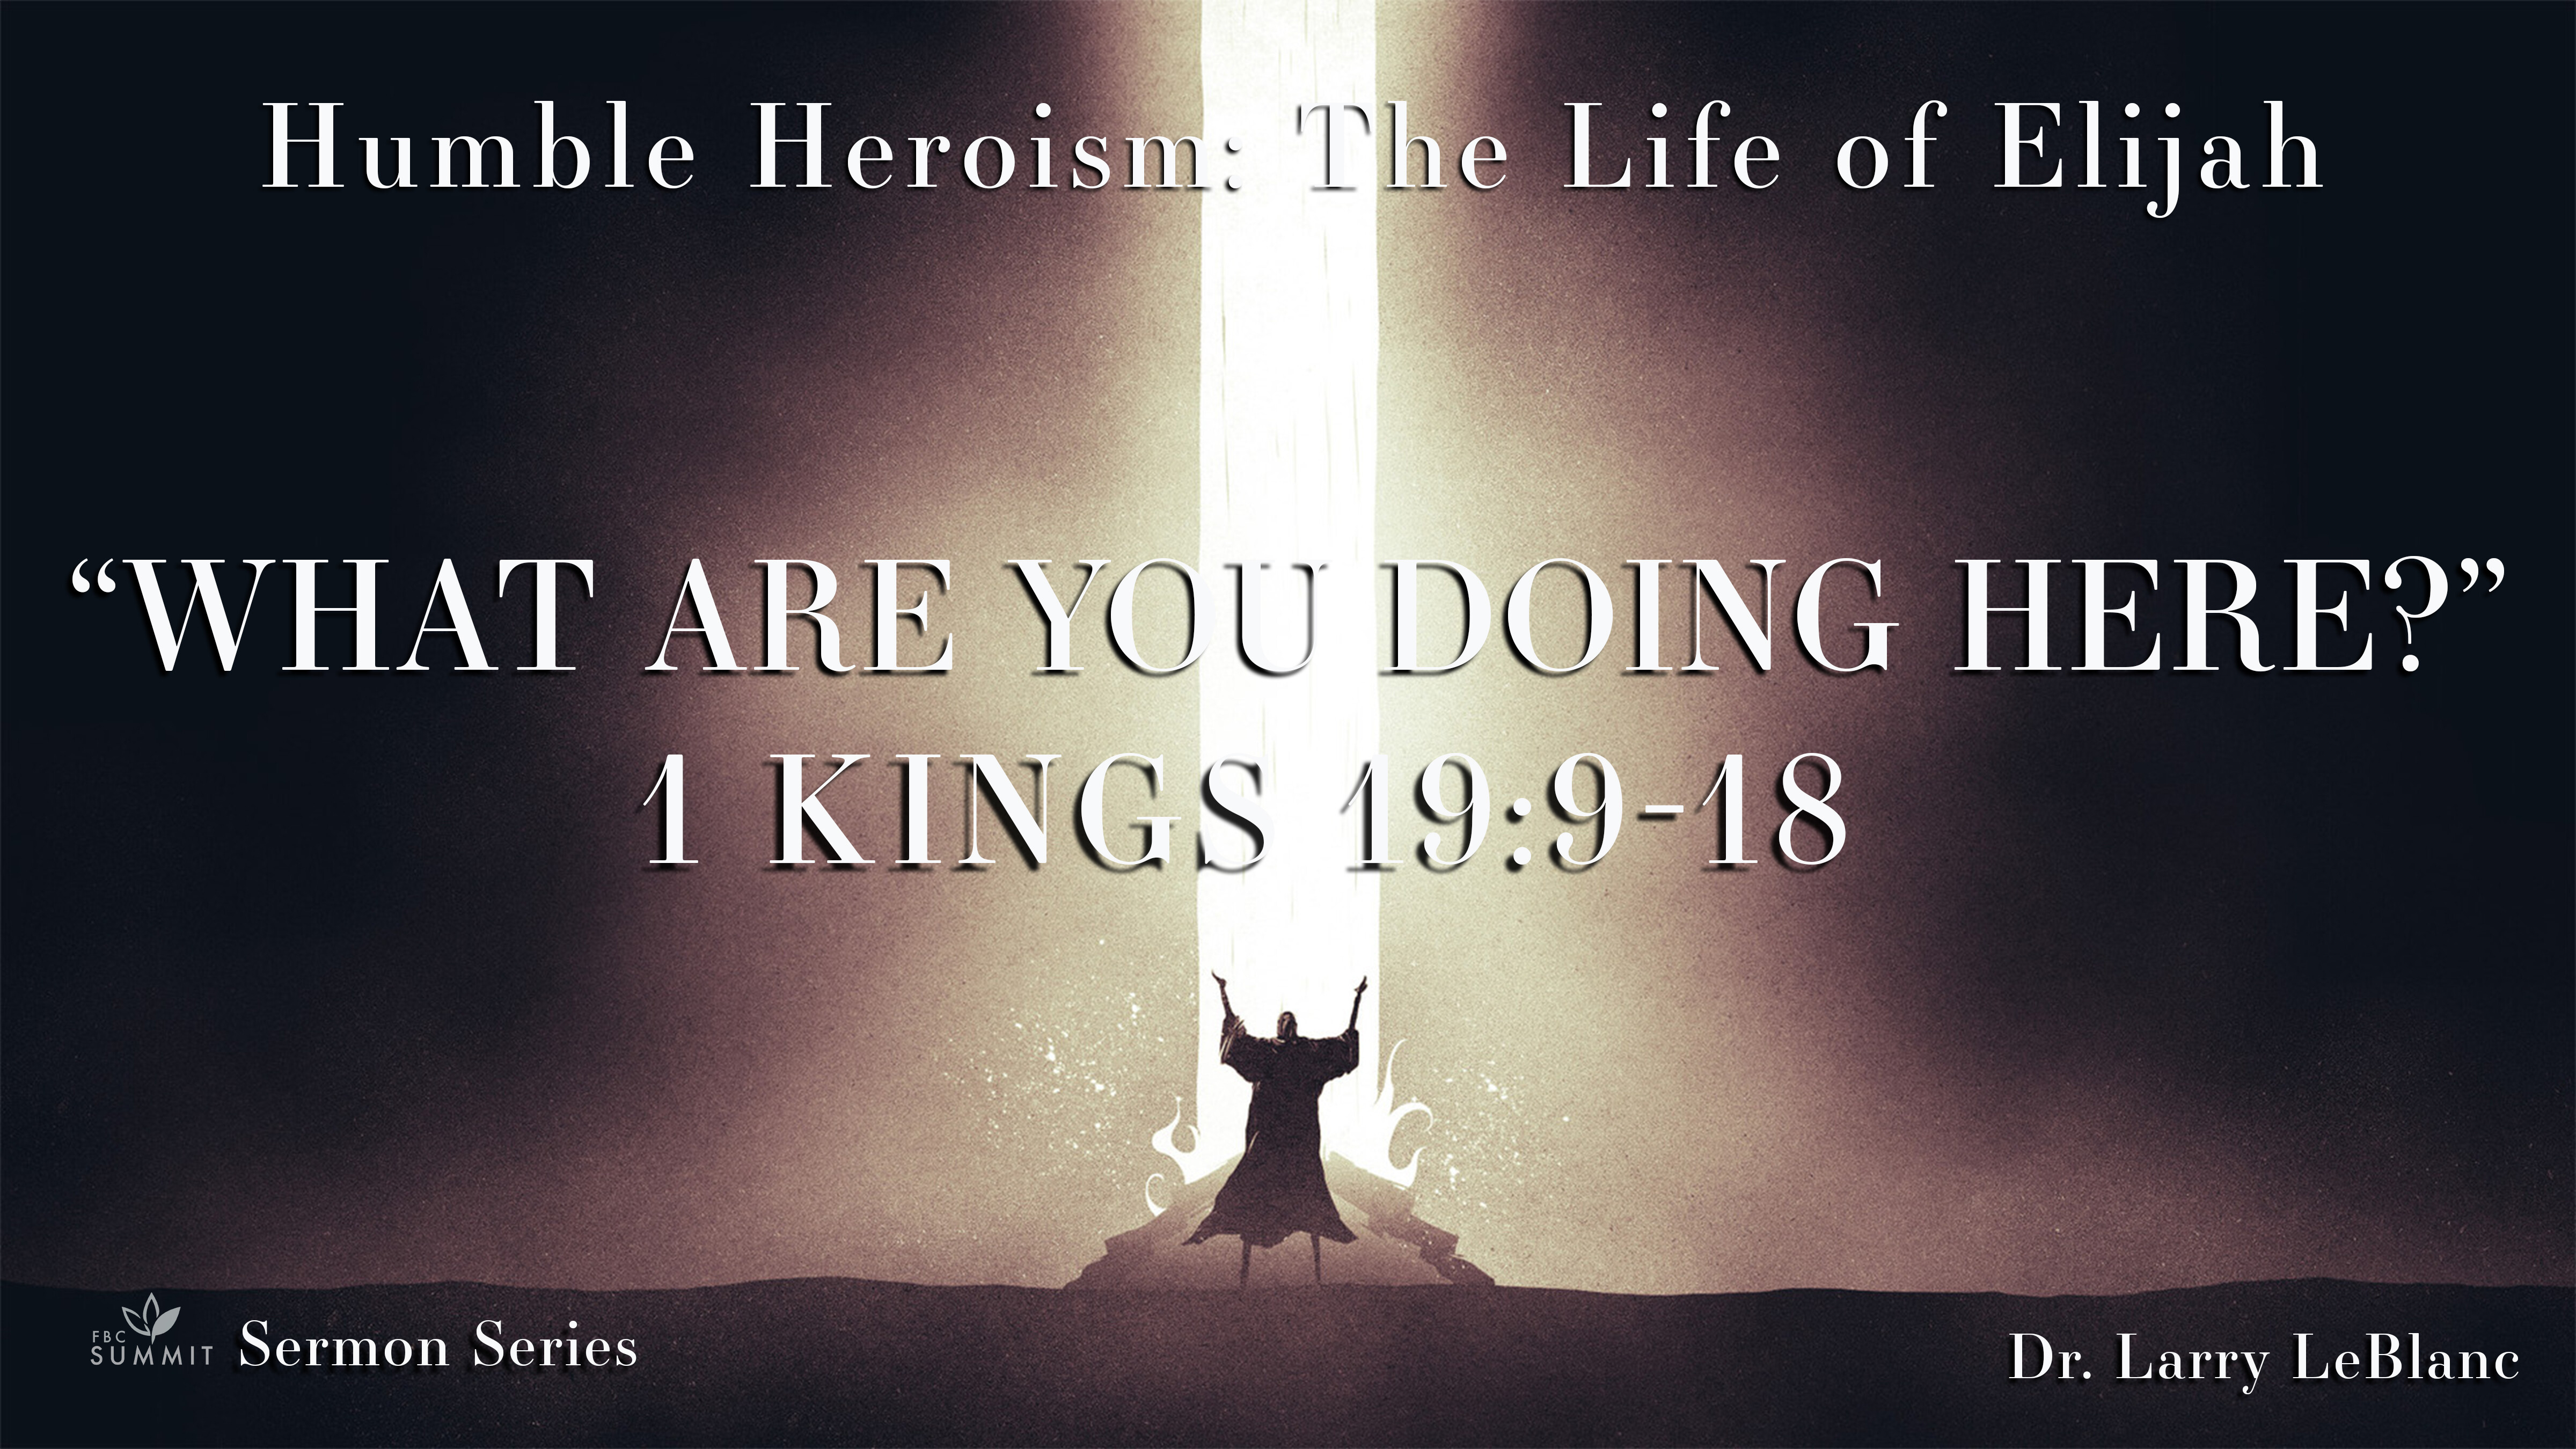 "What Are You Doing Here?" 1 Kings 19:9-18 // Dr. Larry LeBlanc